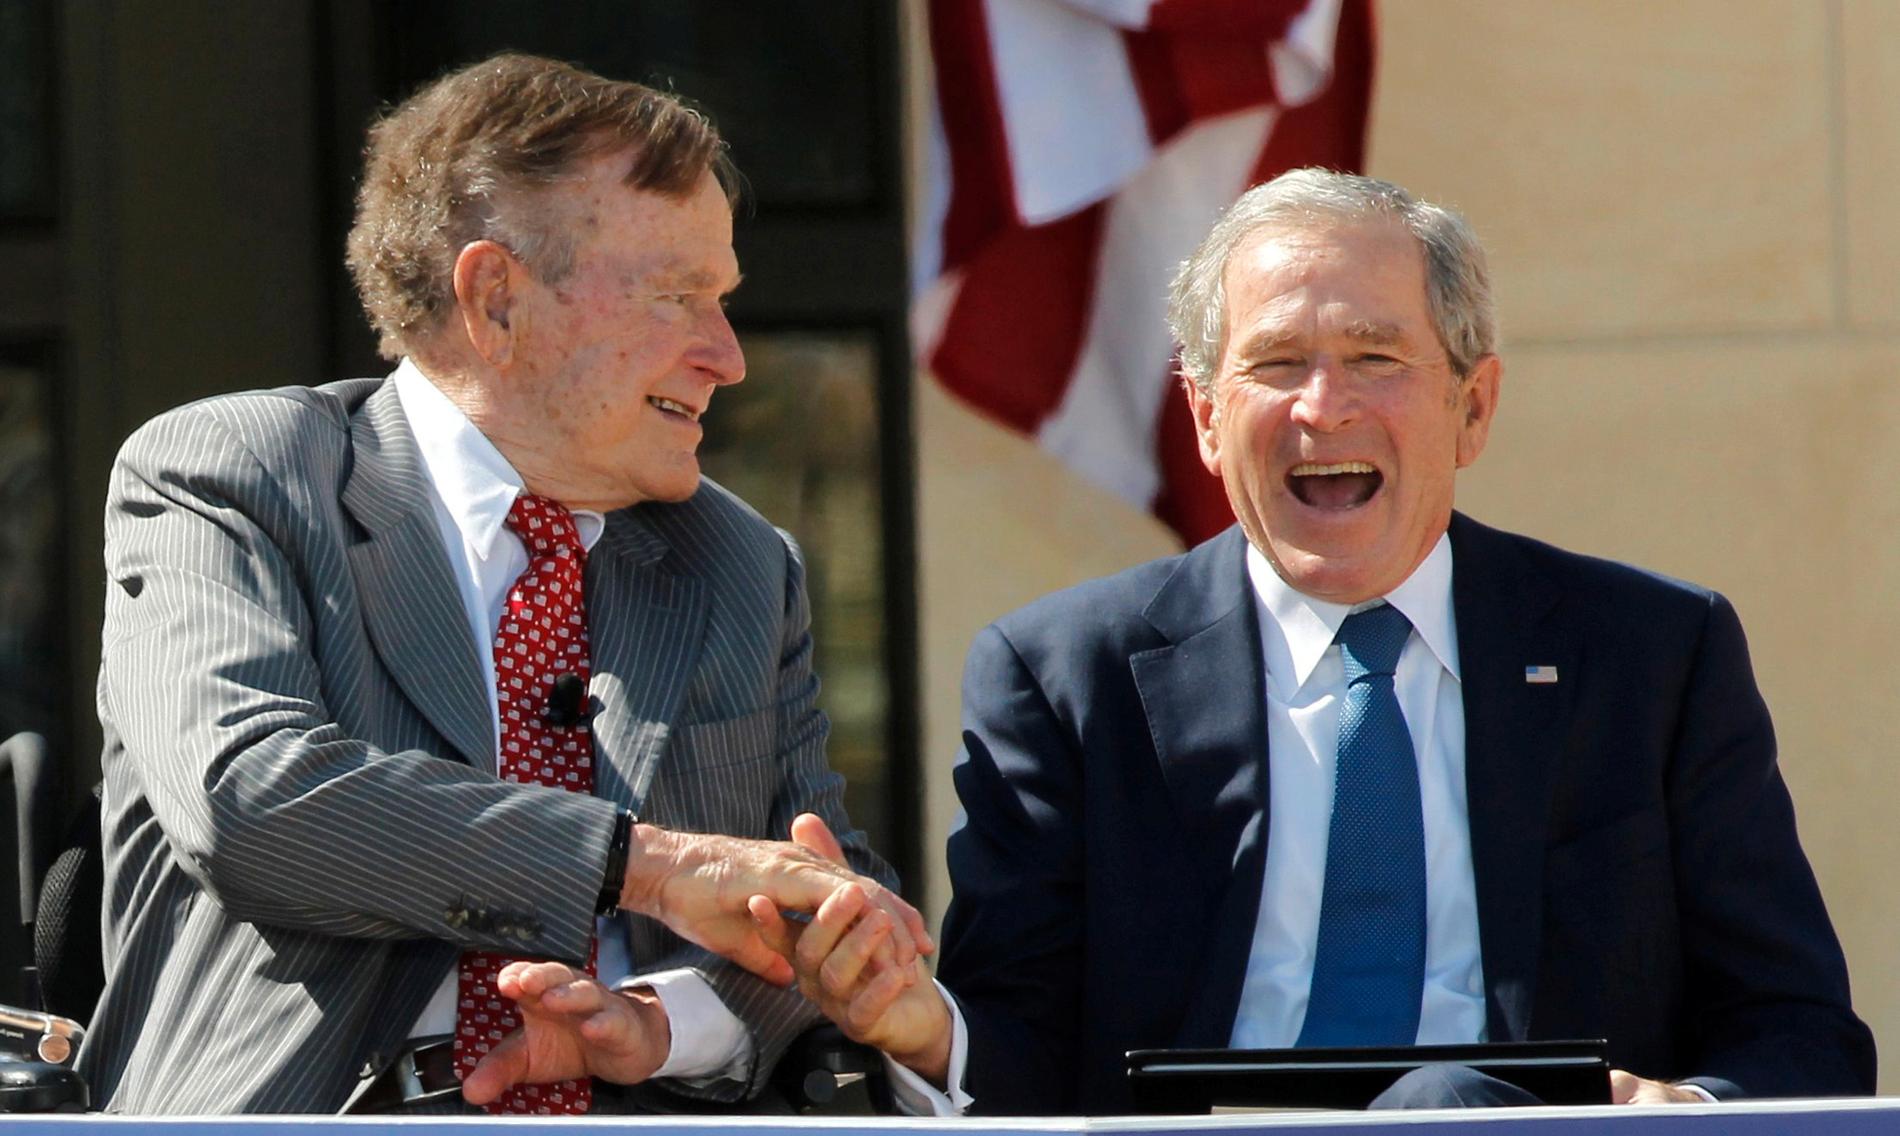 Father and son, both former U.S. Presidents, George H.W. Bush (L) and George W. Bush, shake hands at the dedication for the George W. Bush Presidential Center on the campus of Southern Methodist University in Dallas, Texas April 25, 2013.